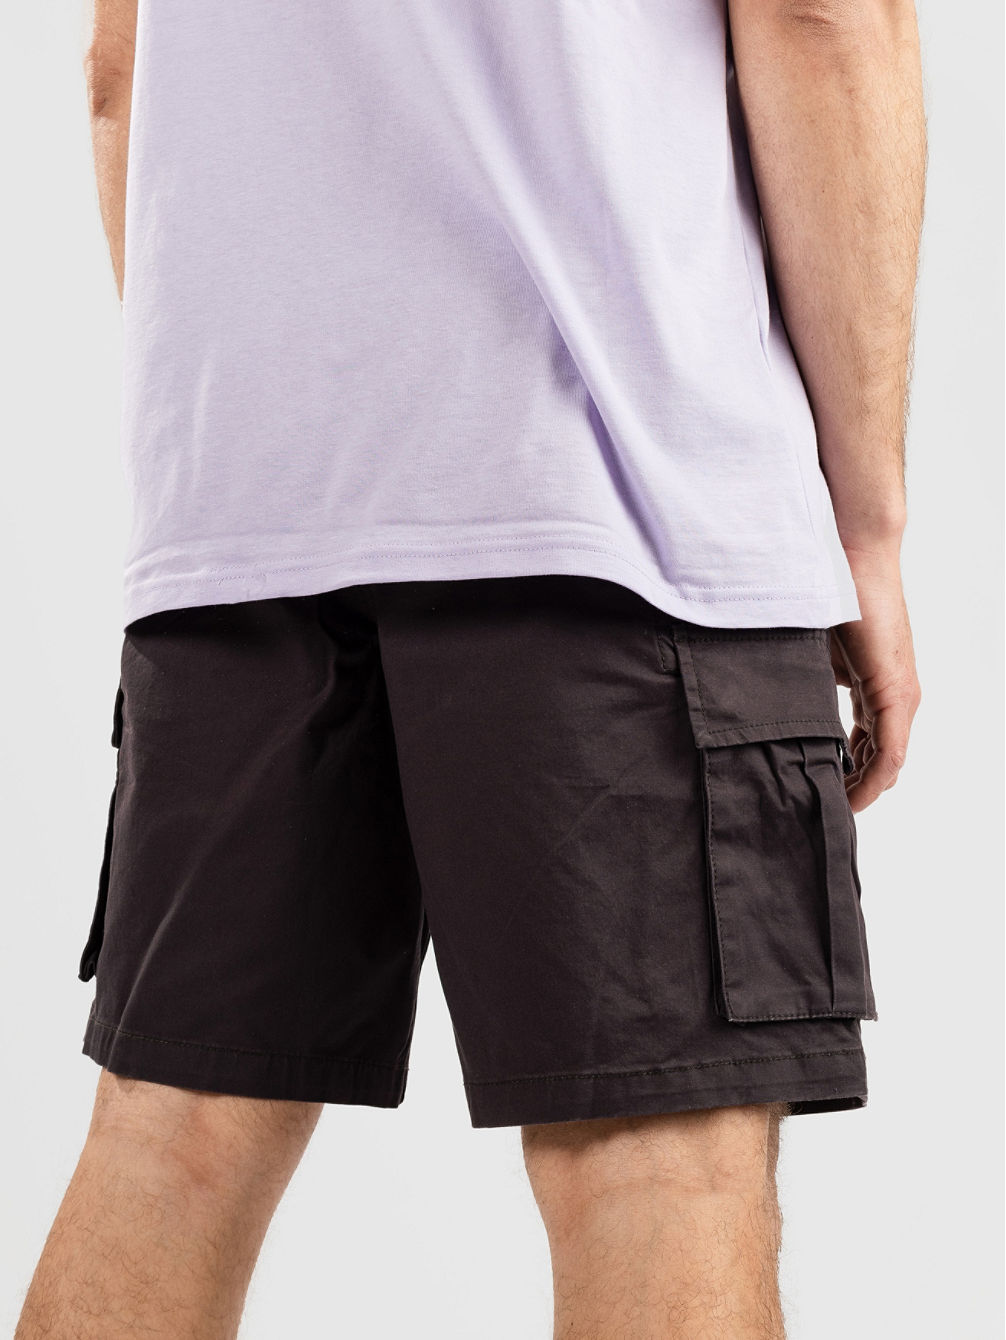 Relaxed Cargo Shorts